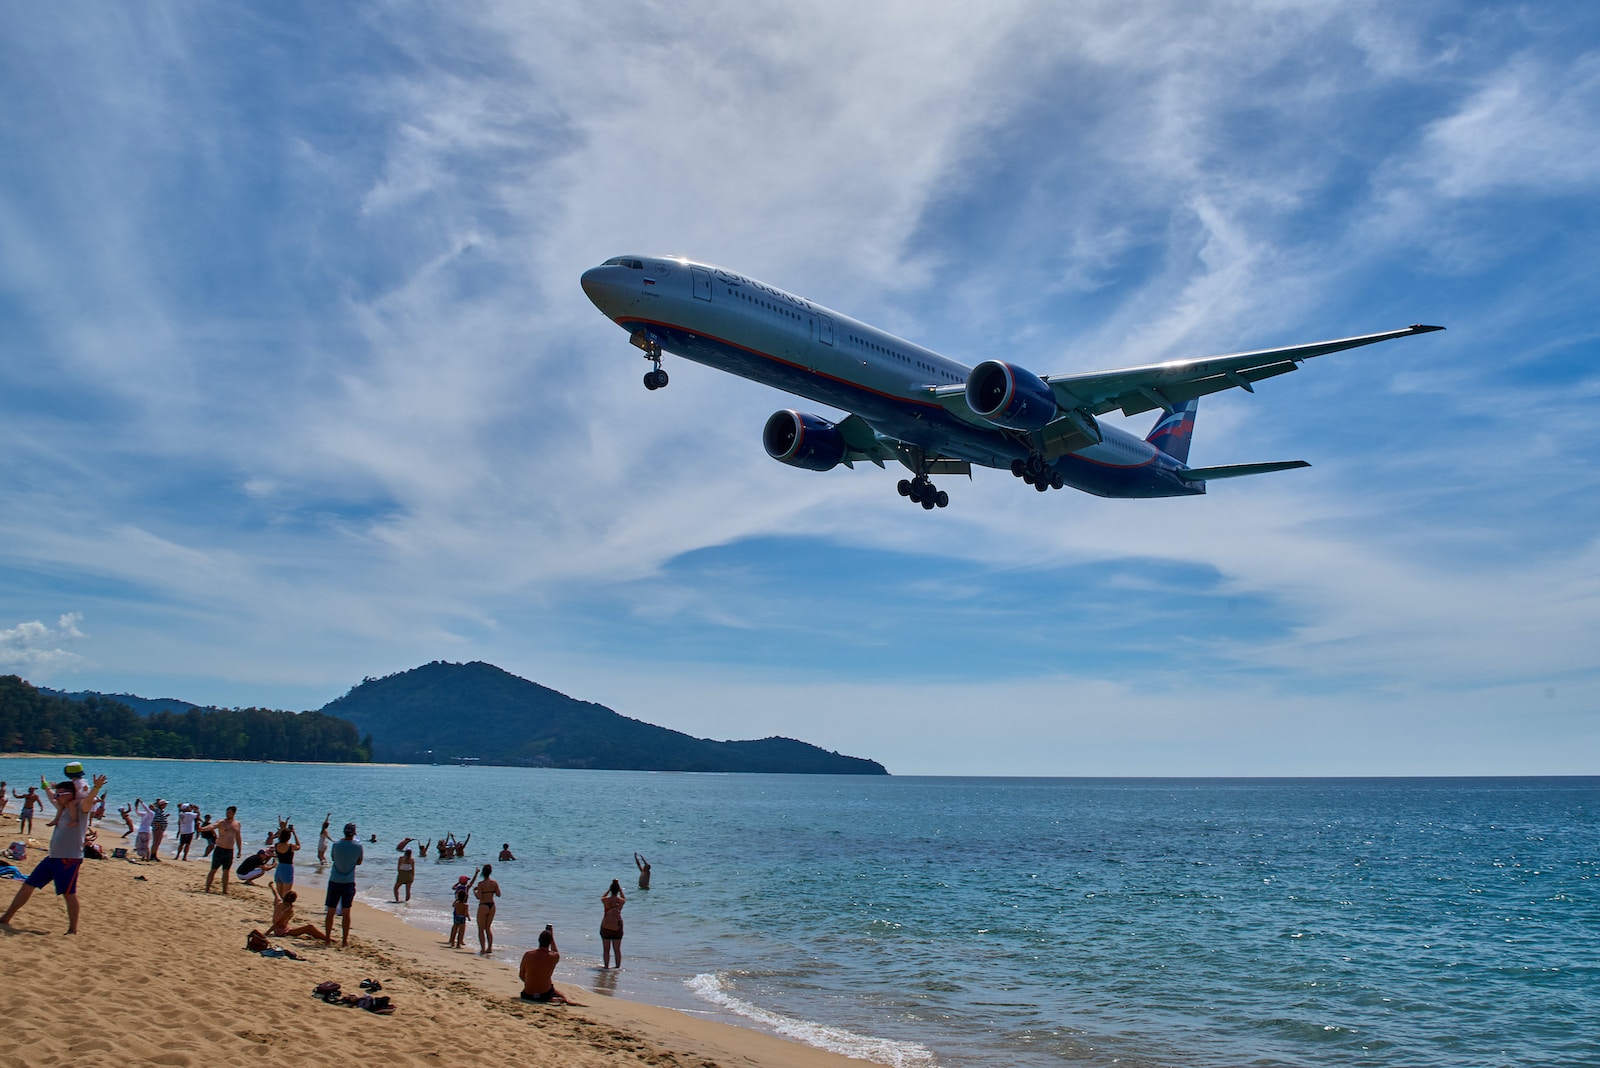 A tourist attraction - on Phuket the large passenger planes land just a few meters above the beach.